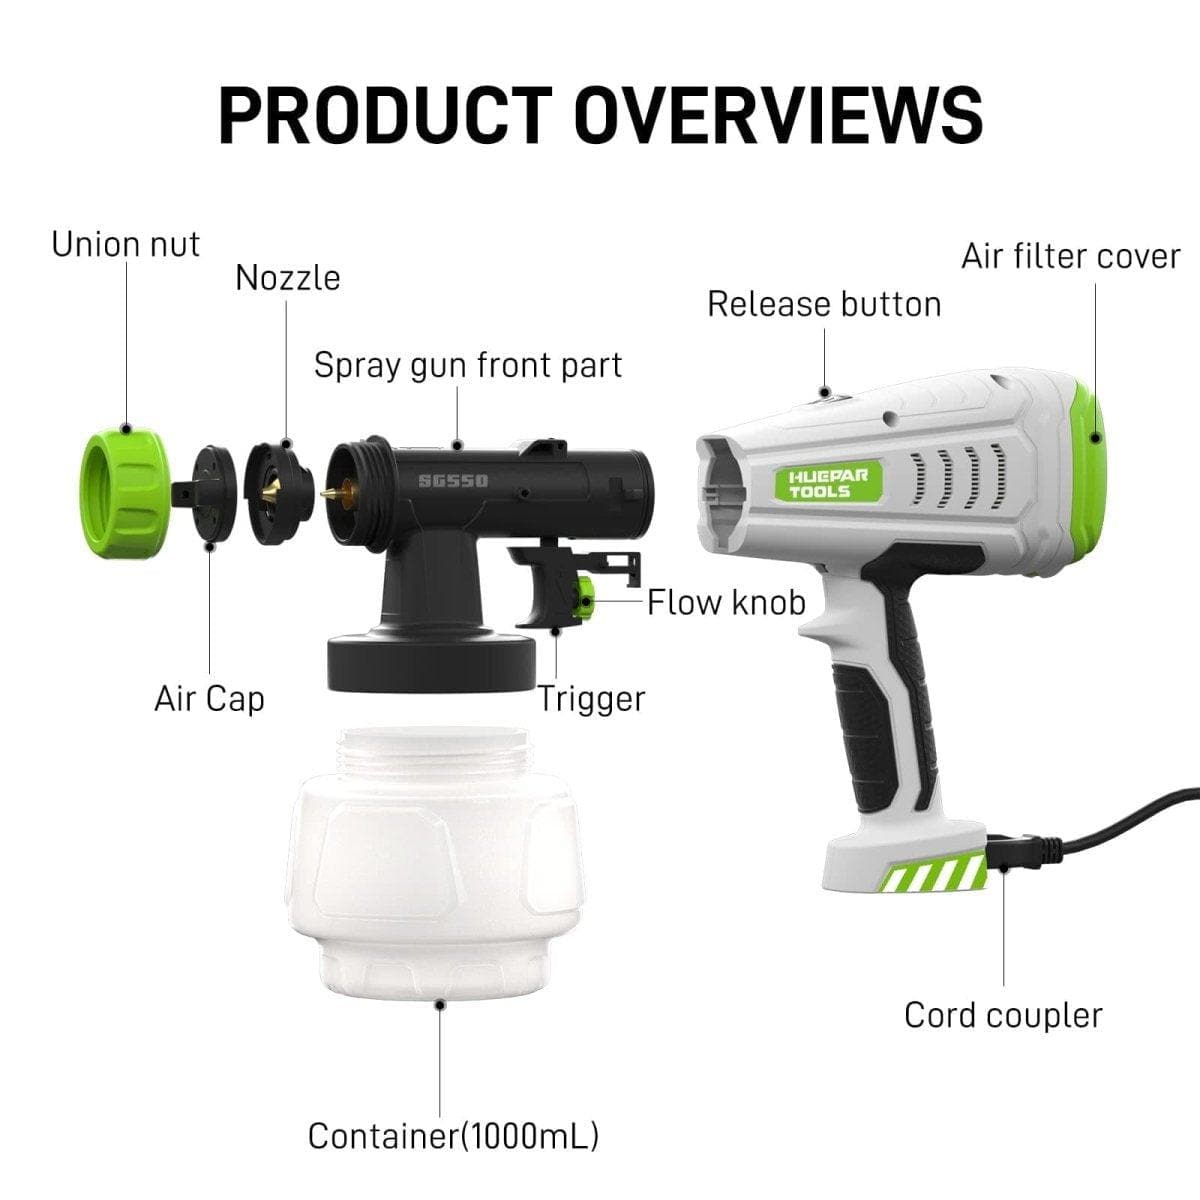 Huepar Tools SG550 HVLP electric paint sprayer with 1000ml capacity and 4 metal nozzles, 3 patterns for home interior and exterior walls, ceiling, cabinet, fence, and chair7